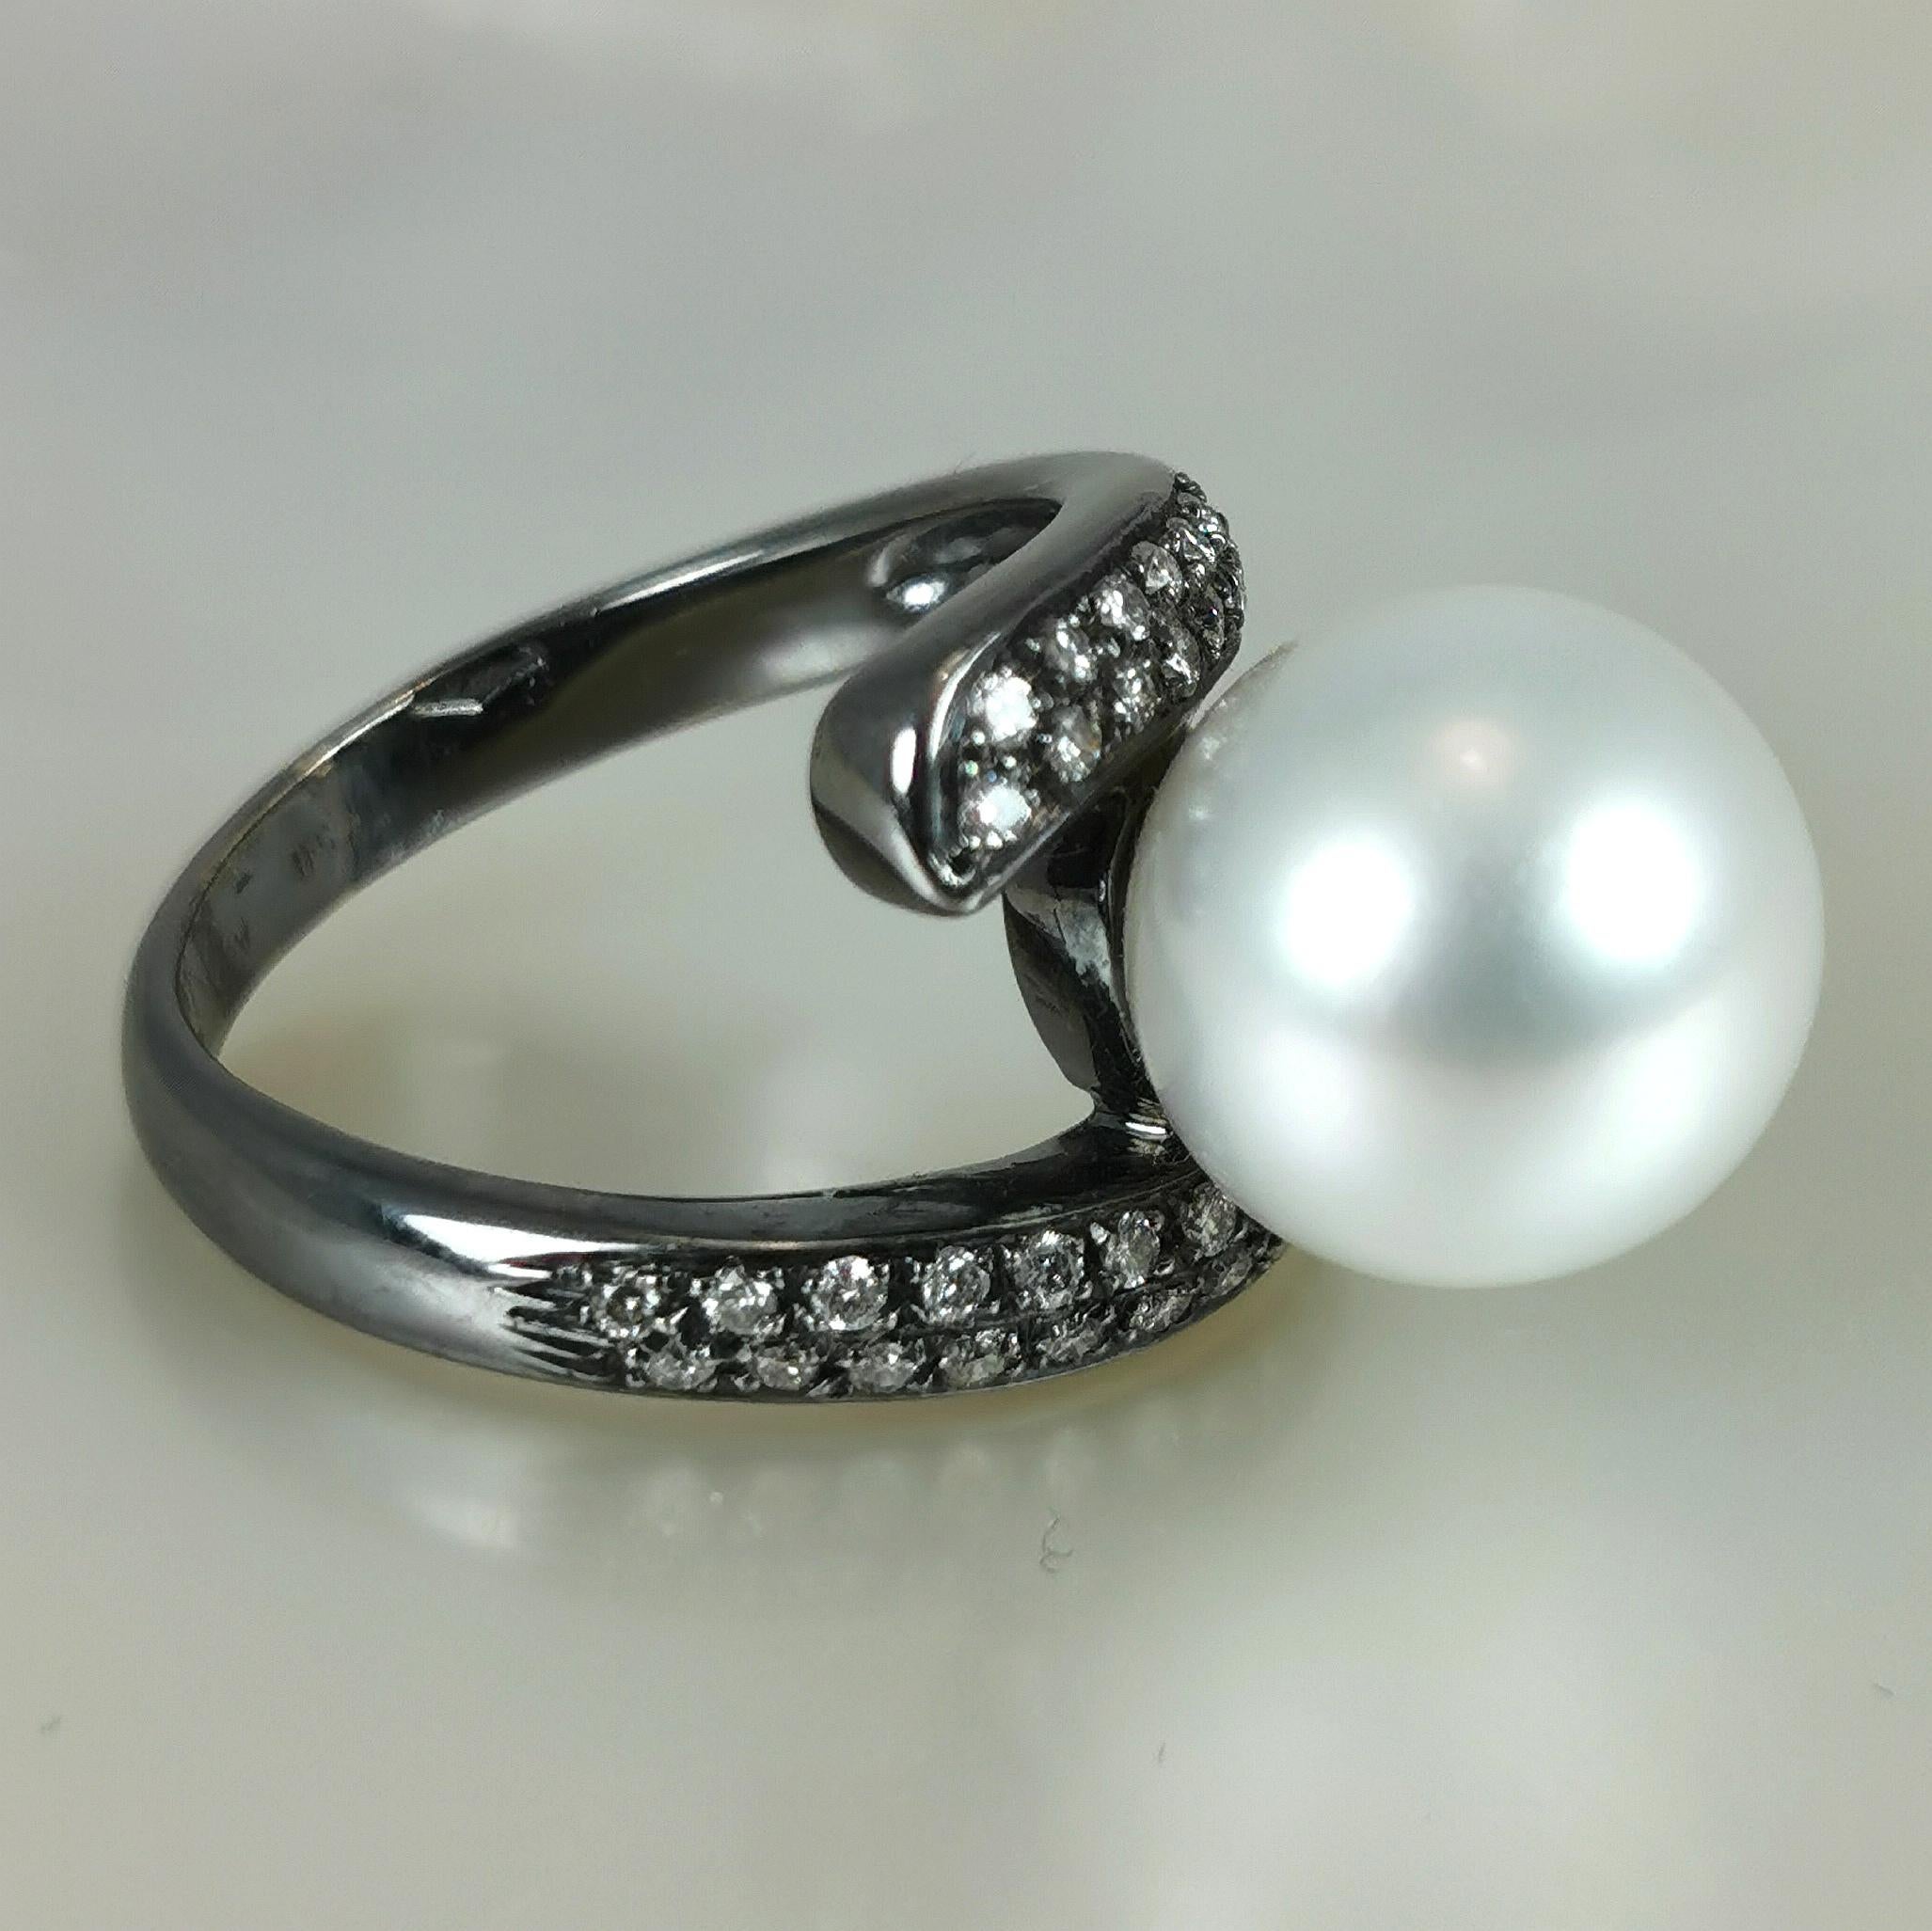 Beautiful Cocktail ring in white gold 18K rhodium-plated black with diamonds and a beautiful australian saltwater cultured pearl Southsea white top quality.

Total 42 diamonds brillant cut 0,38cts (F/VS2)
Pearl shape & size : Round - Ø 11,5x12